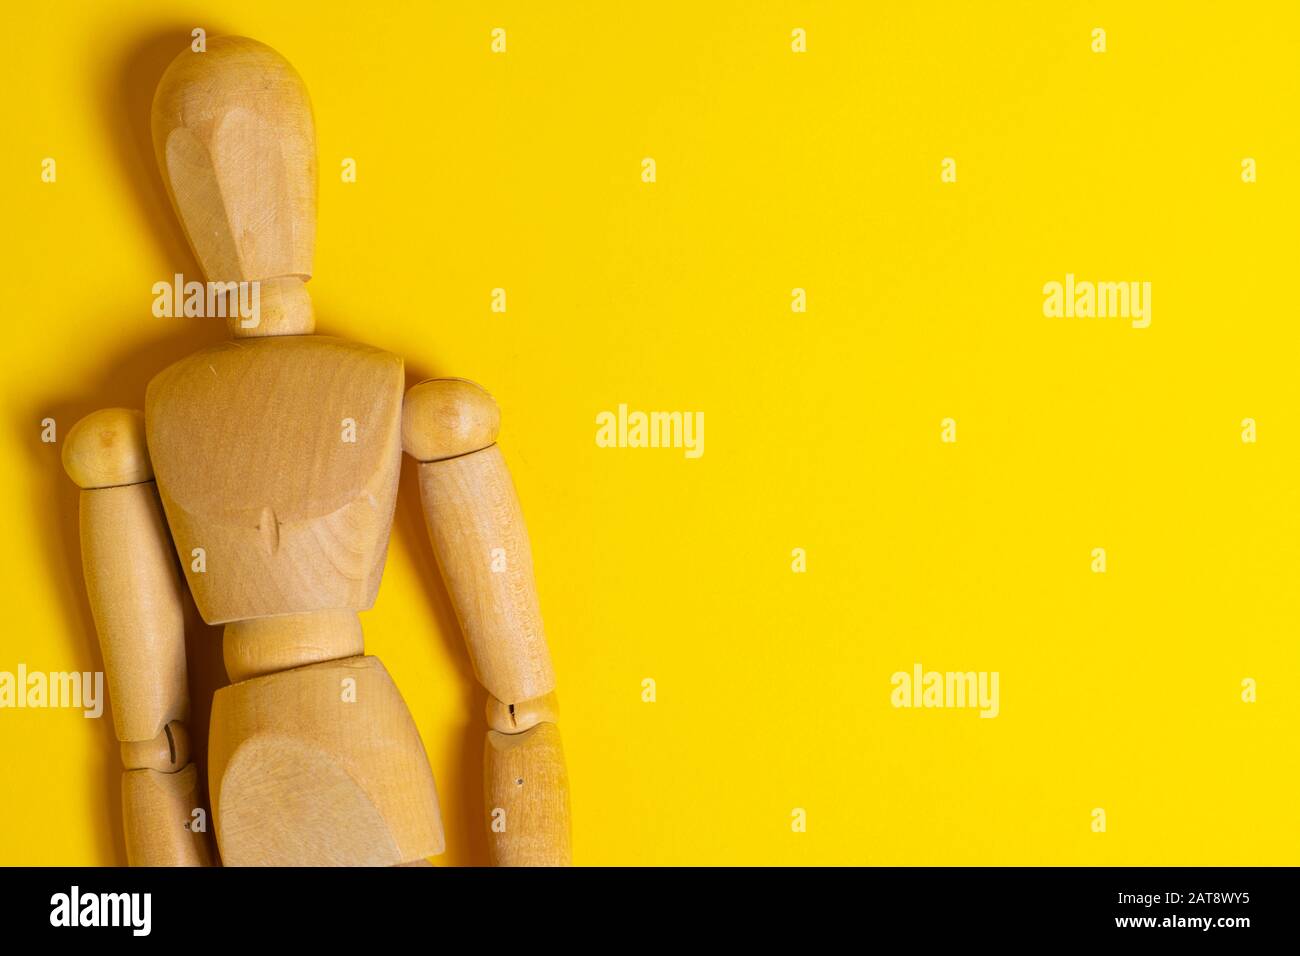 Wooden Human mannequin on a bright yellow background Stock Photo